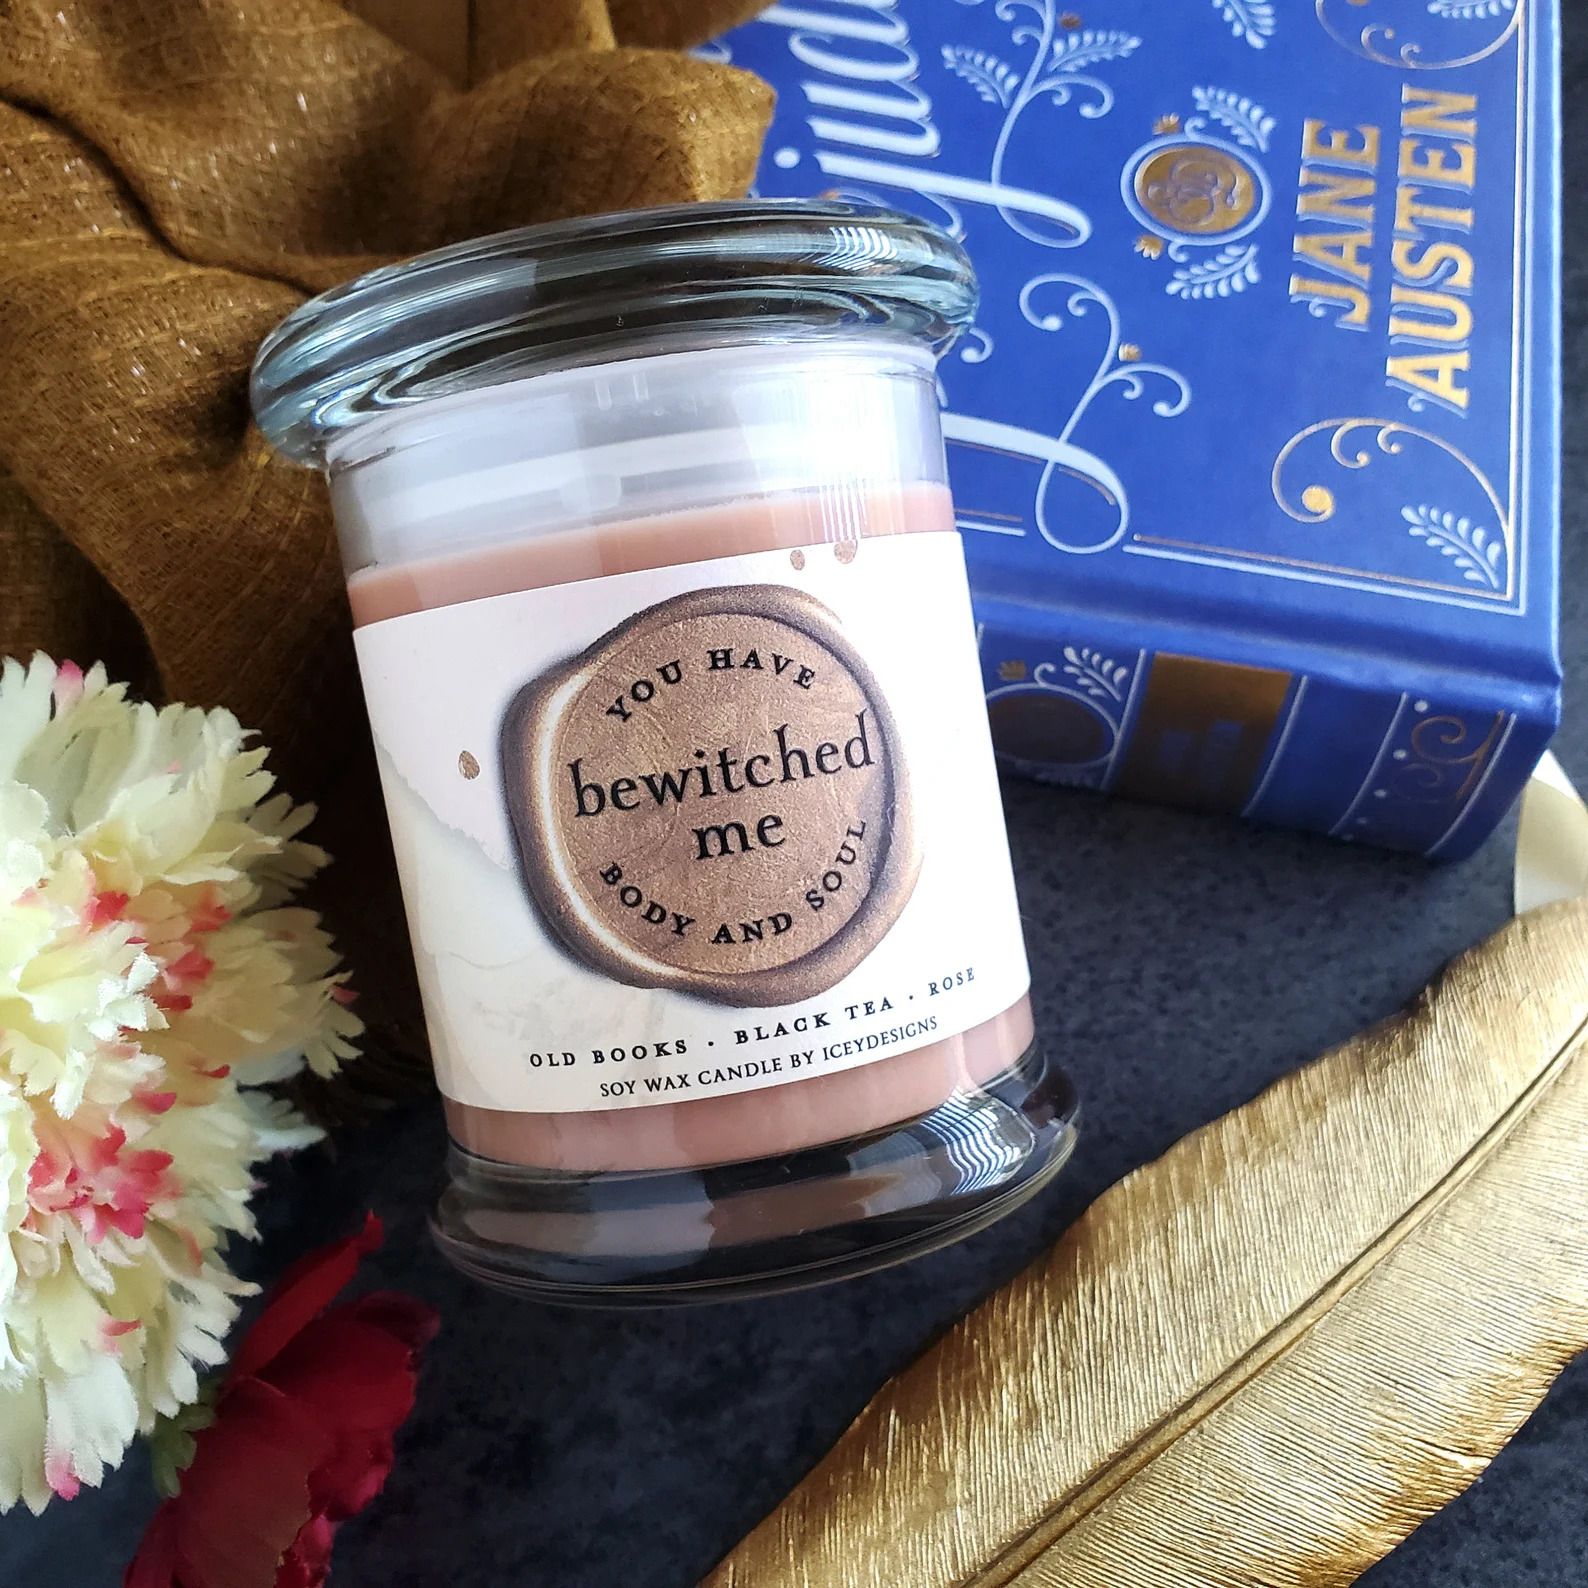 bewitched me body and soul candle